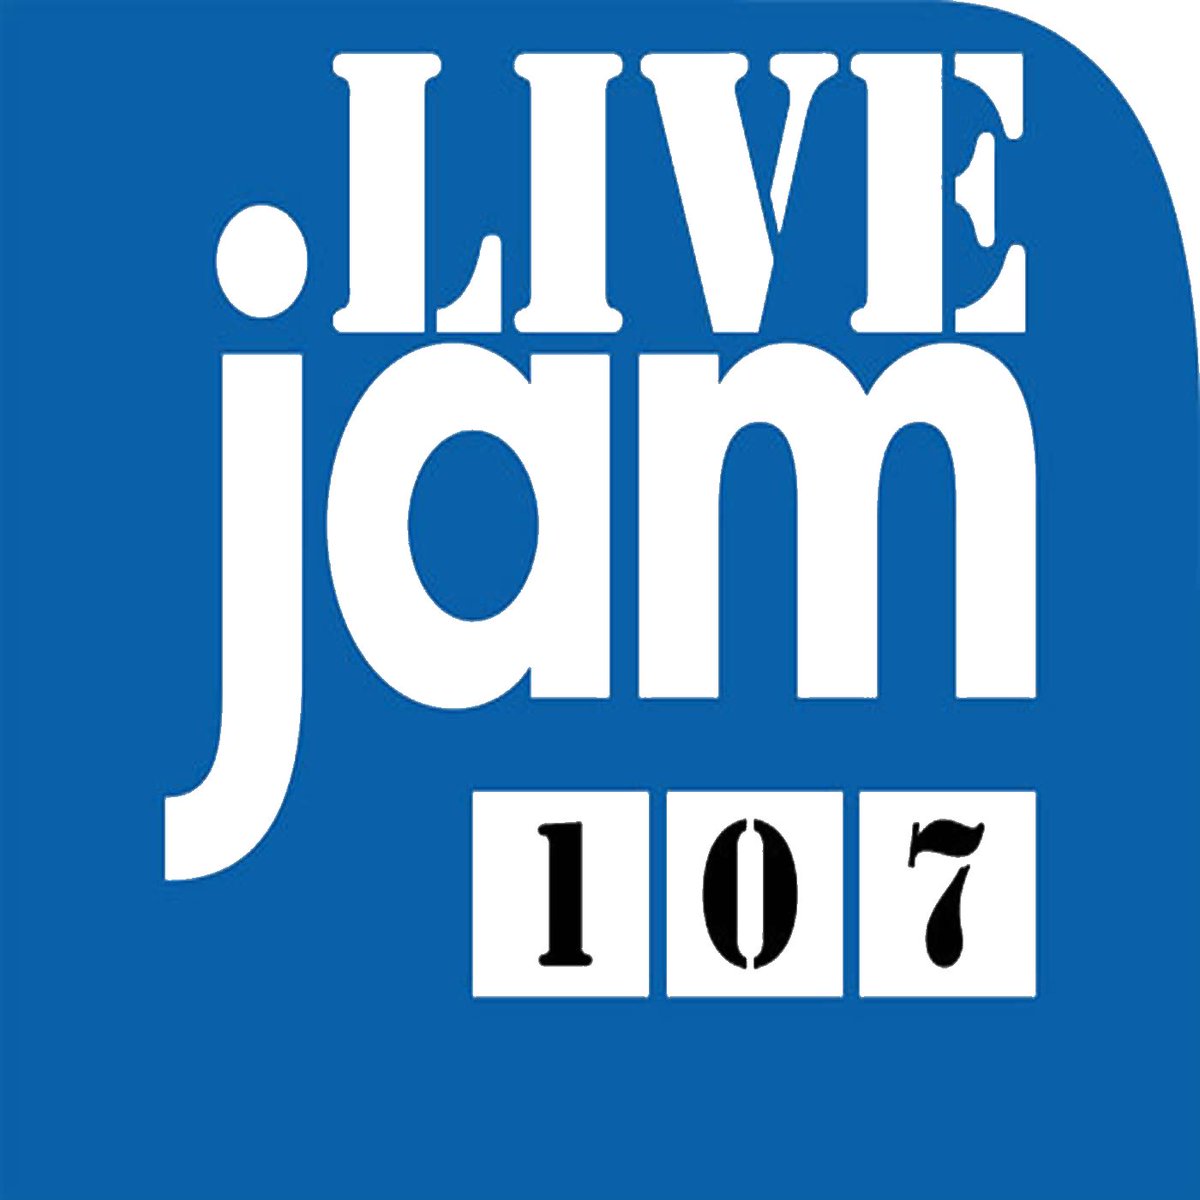 Playing Now at Live Jam 107 (https://t.co/D5mPLm9M7E) is Jenny Was A Friend Of Mine by The Killers ft. The Pet Shop Boys Where Every Song Played is the Live Version! (https://t.co/cuspRYugQ9)
 Get this Music Now! https://t.co/owQGiJJdSu https://t.co/TXOzDTf6CA